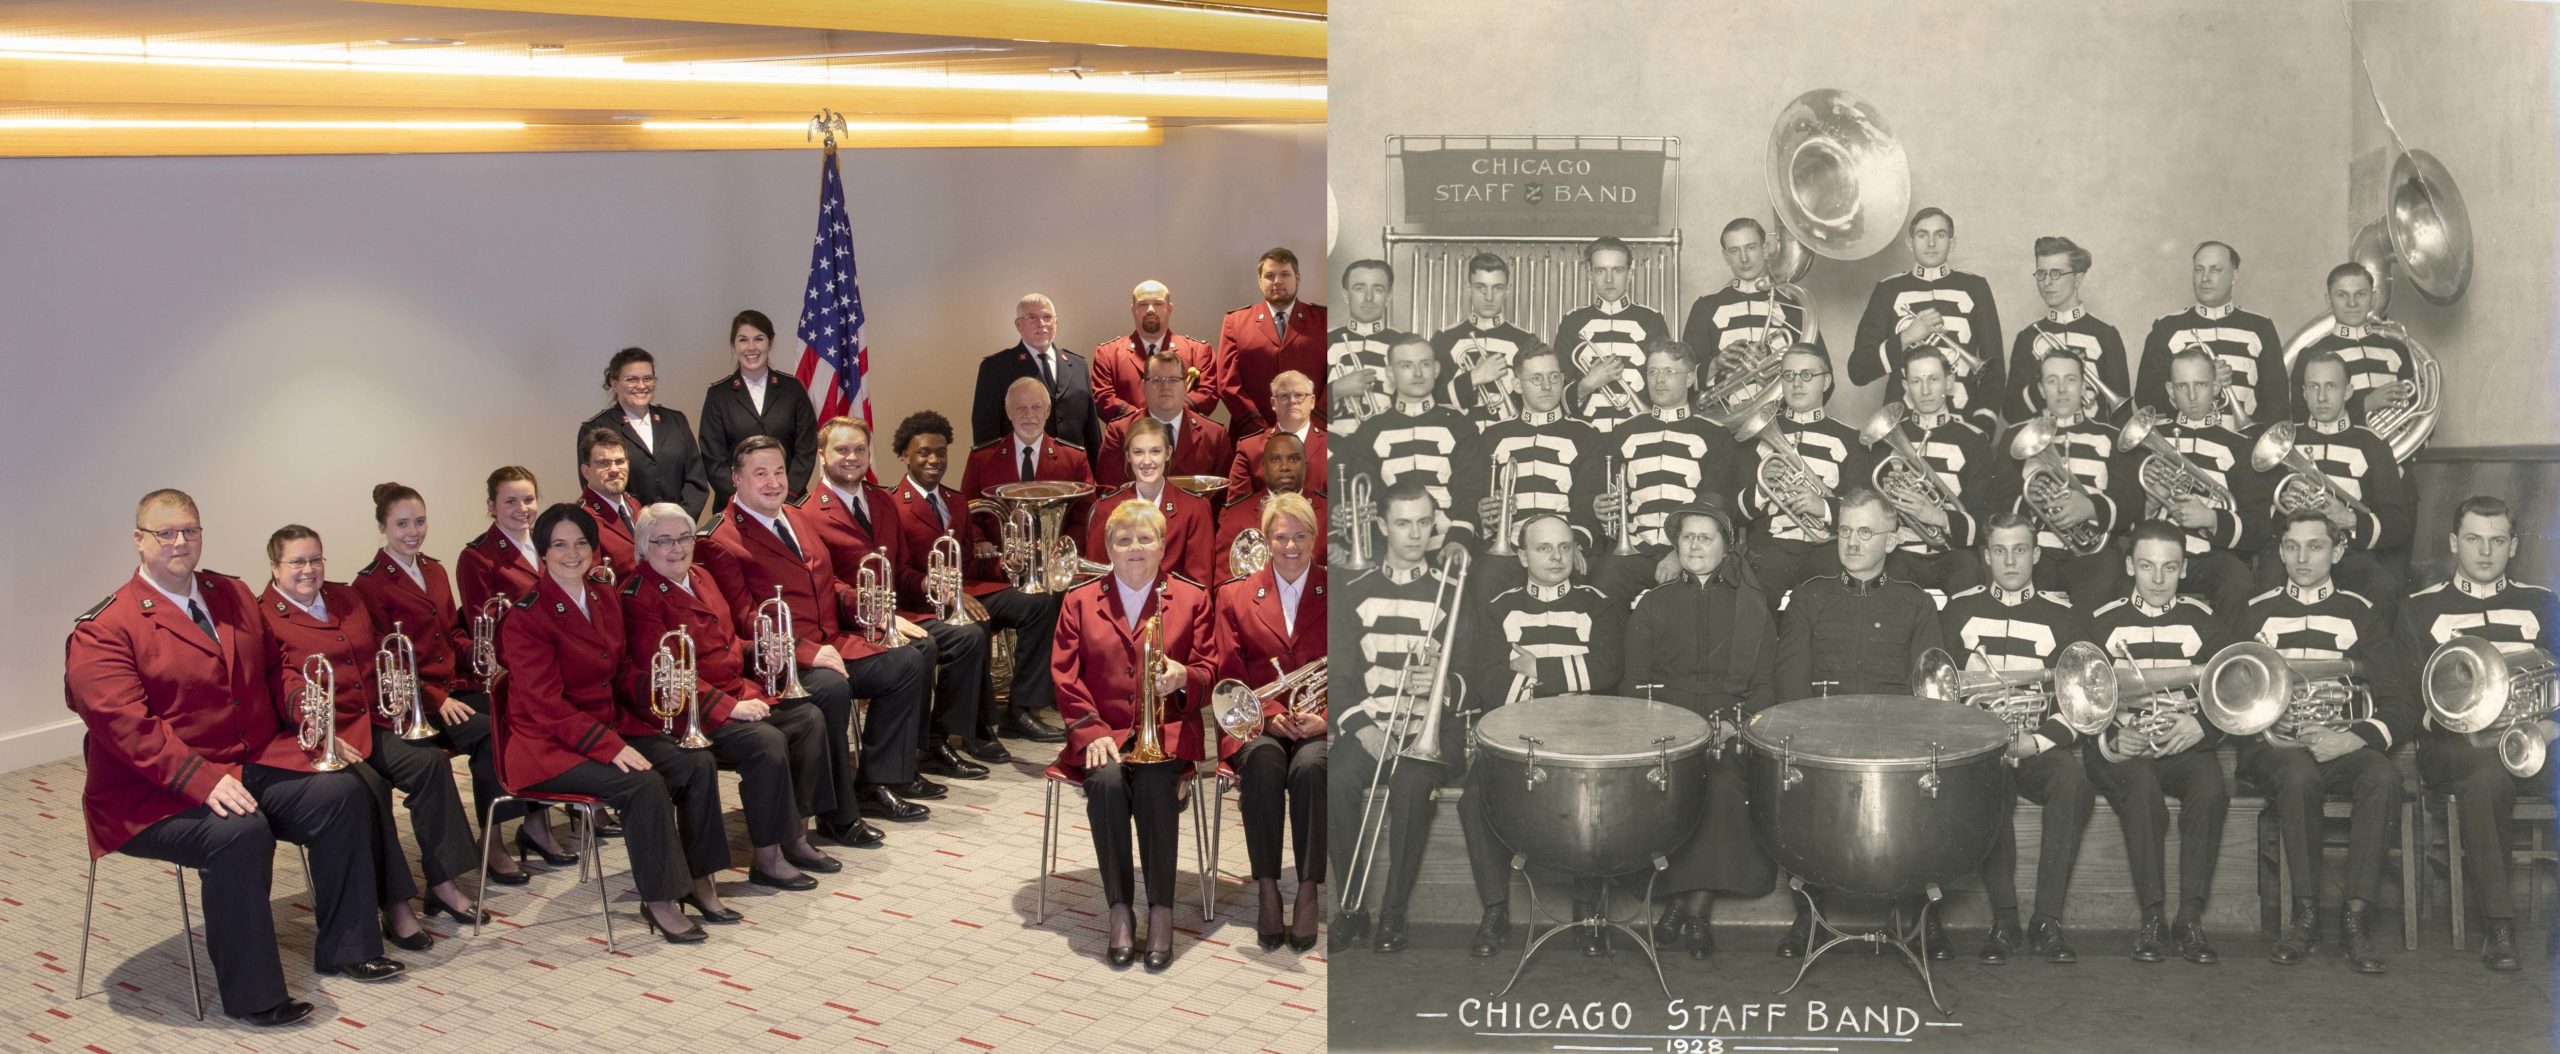 Split screen photo. Image on left shows the 2020 Chicago Staff Band membership. This includes men, women, white and Black musicians. The image on the right shows the 1928 Chicago Staff Band. All of the musicians are white men.